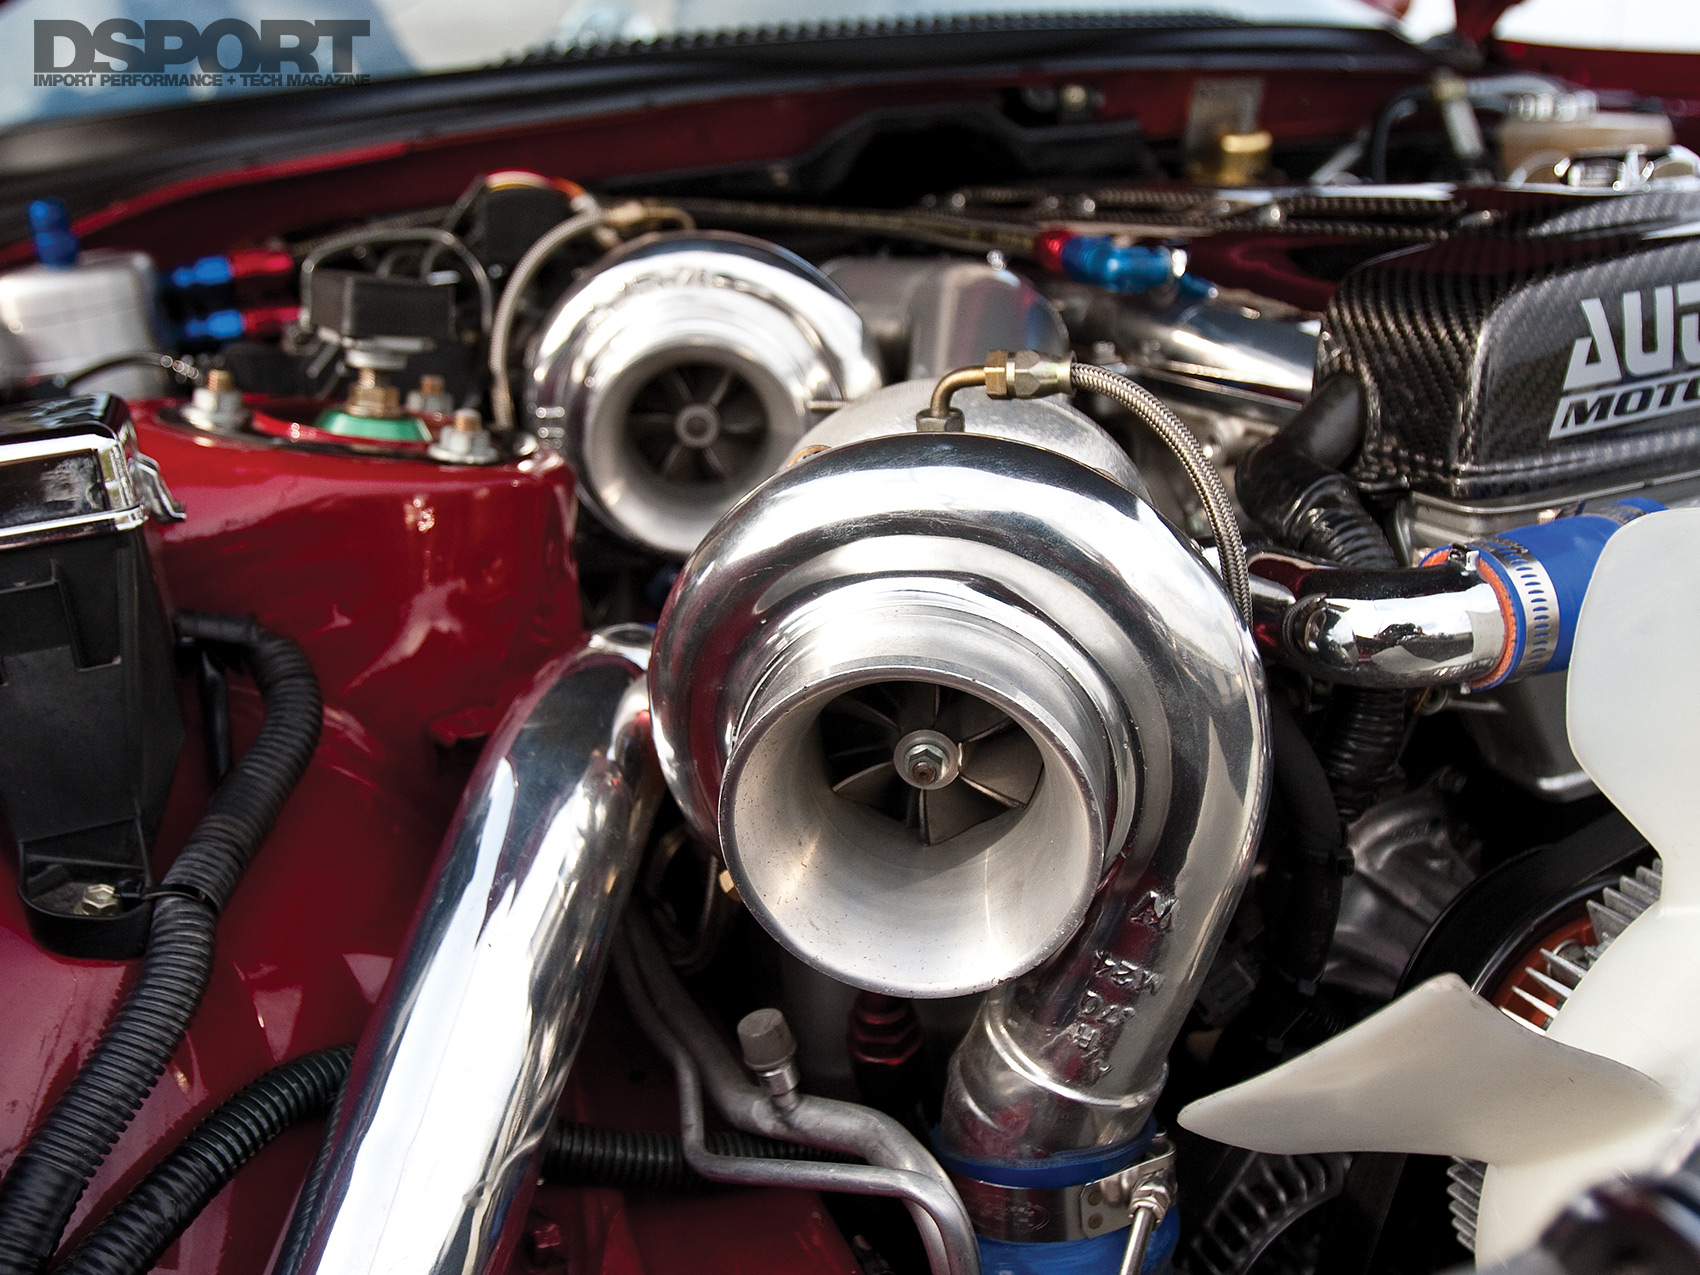 Example of a the Toyota 2JZ engine.